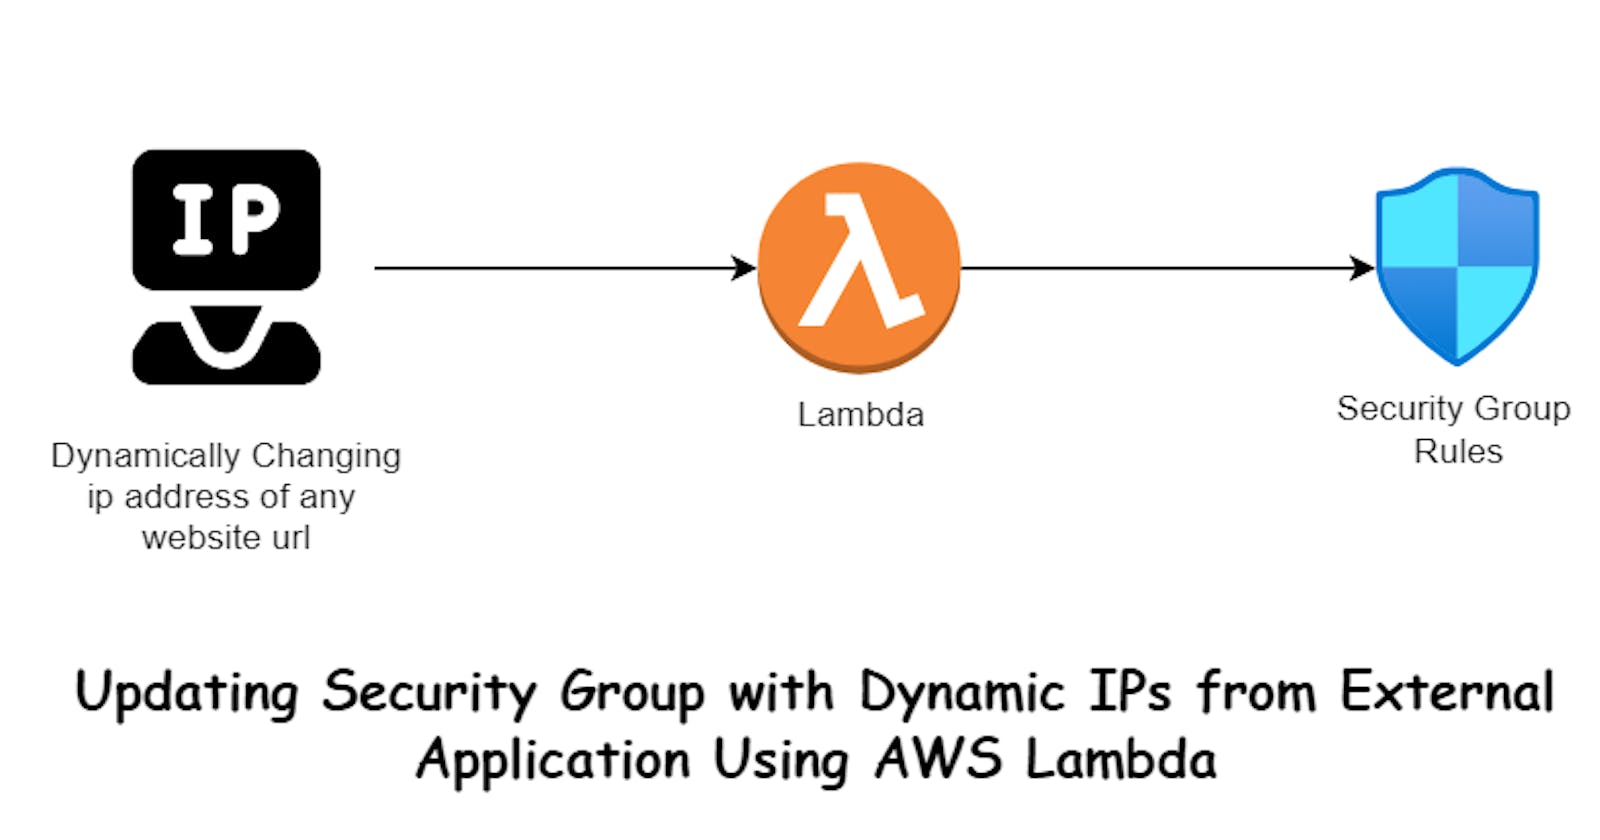 Updating Security Group with Dynamic IPs from External Application Using AWS Lambda